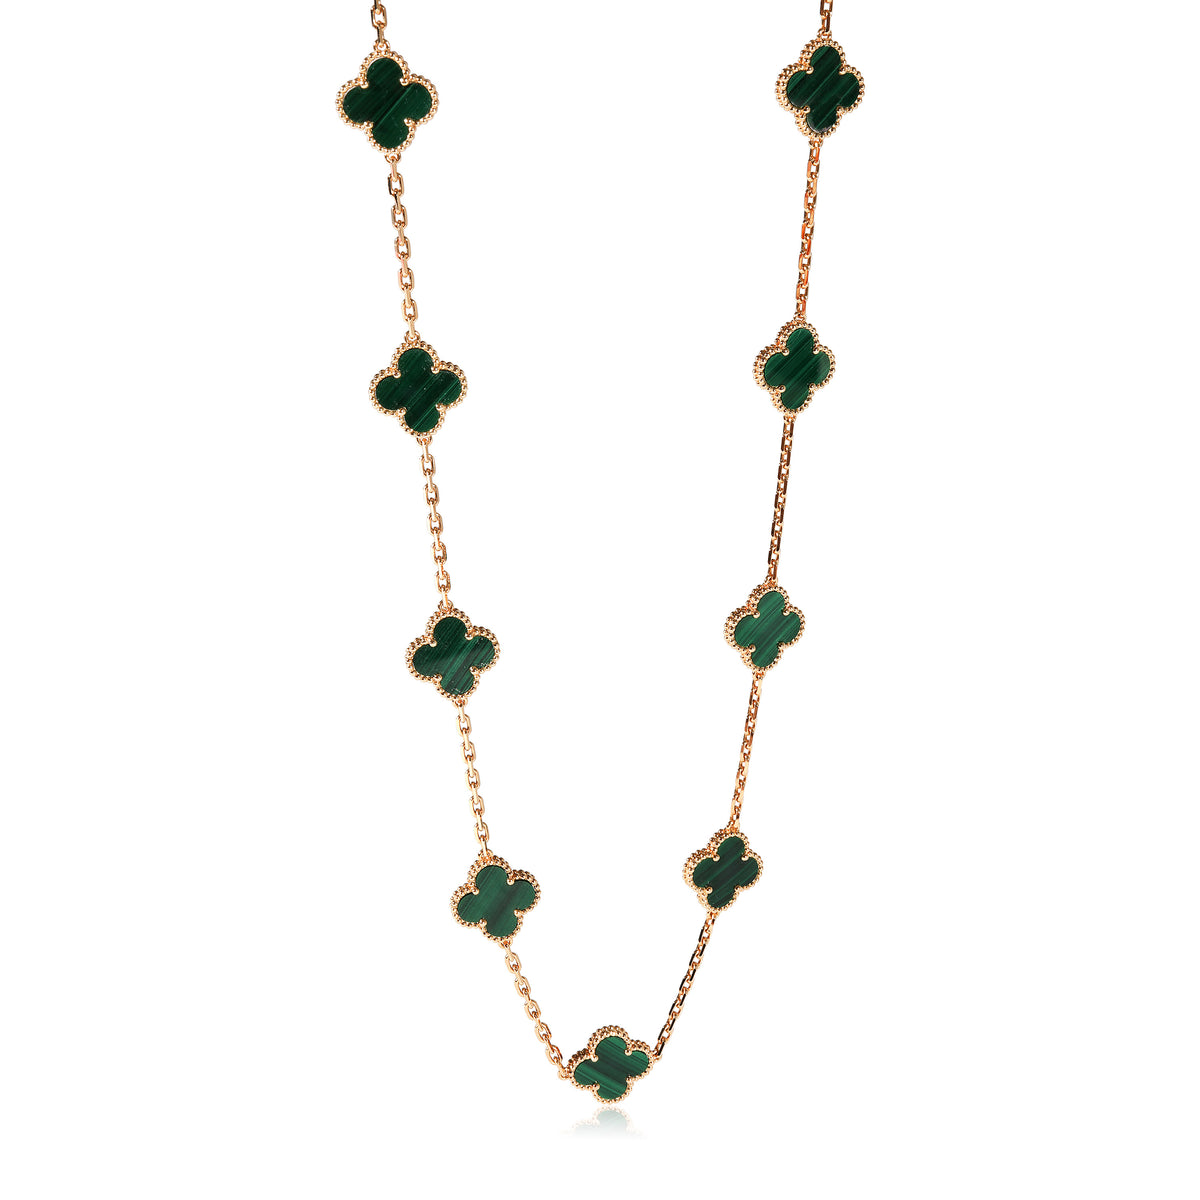 Van Cleef and Arpels Vintage Alhambra Malachite Necklace in 18k YG with 20  Motifs at 1stDibs | maison alhambra malachite, van cleef malachite necklace,  20 motif necklace van cleef